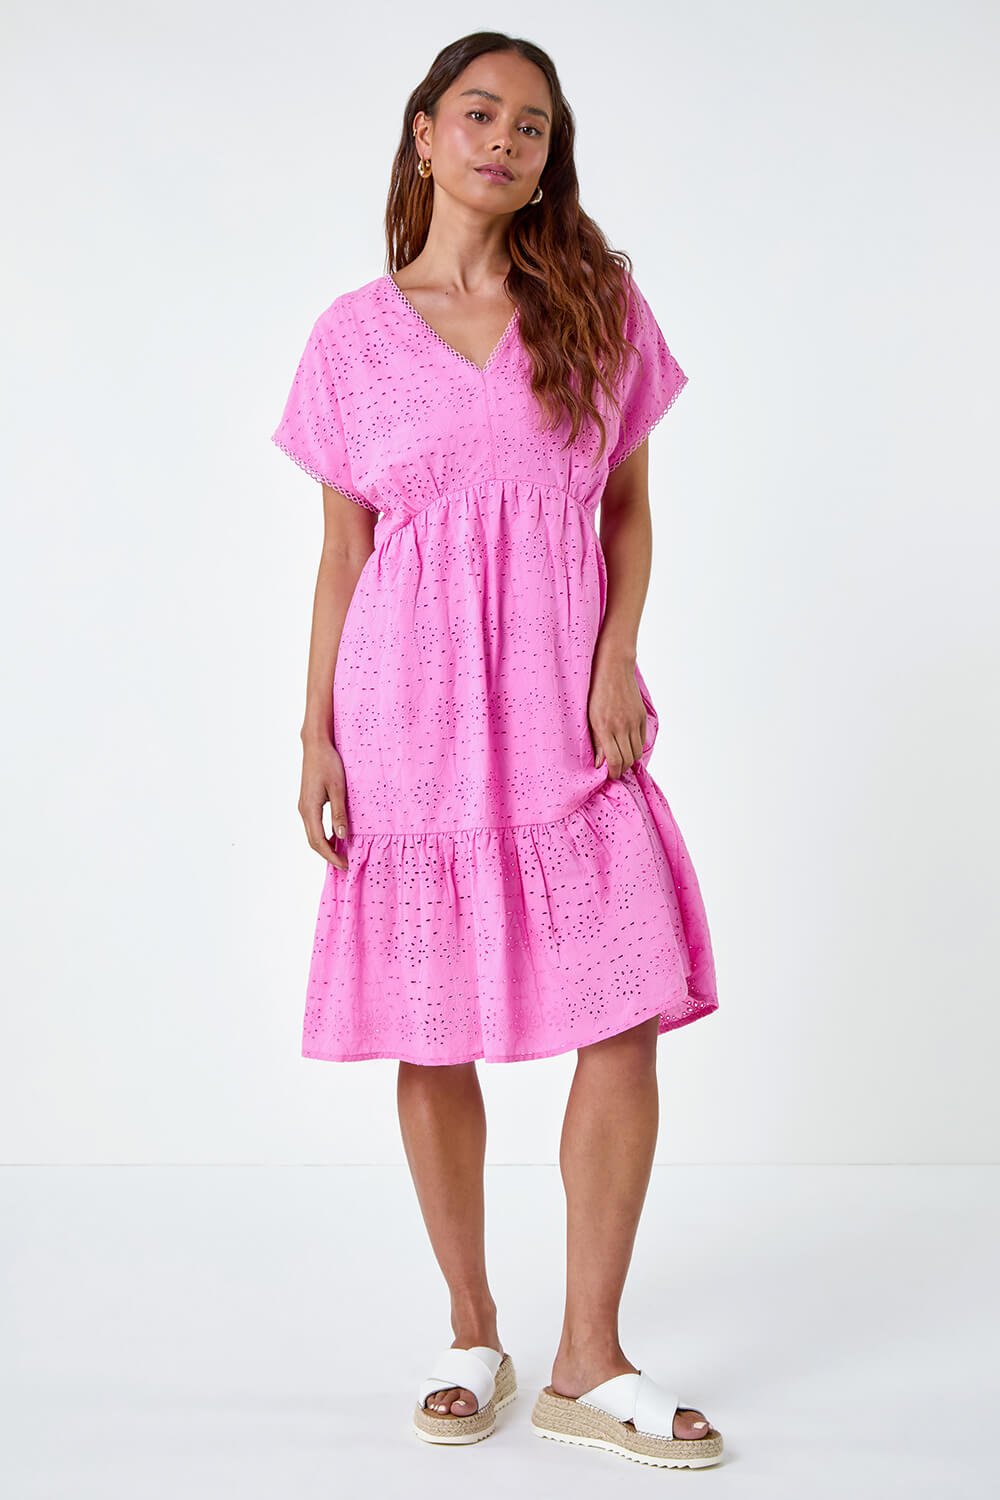 PINK Petite Cotton Broderie Tiered Dress, Image 2 of 5